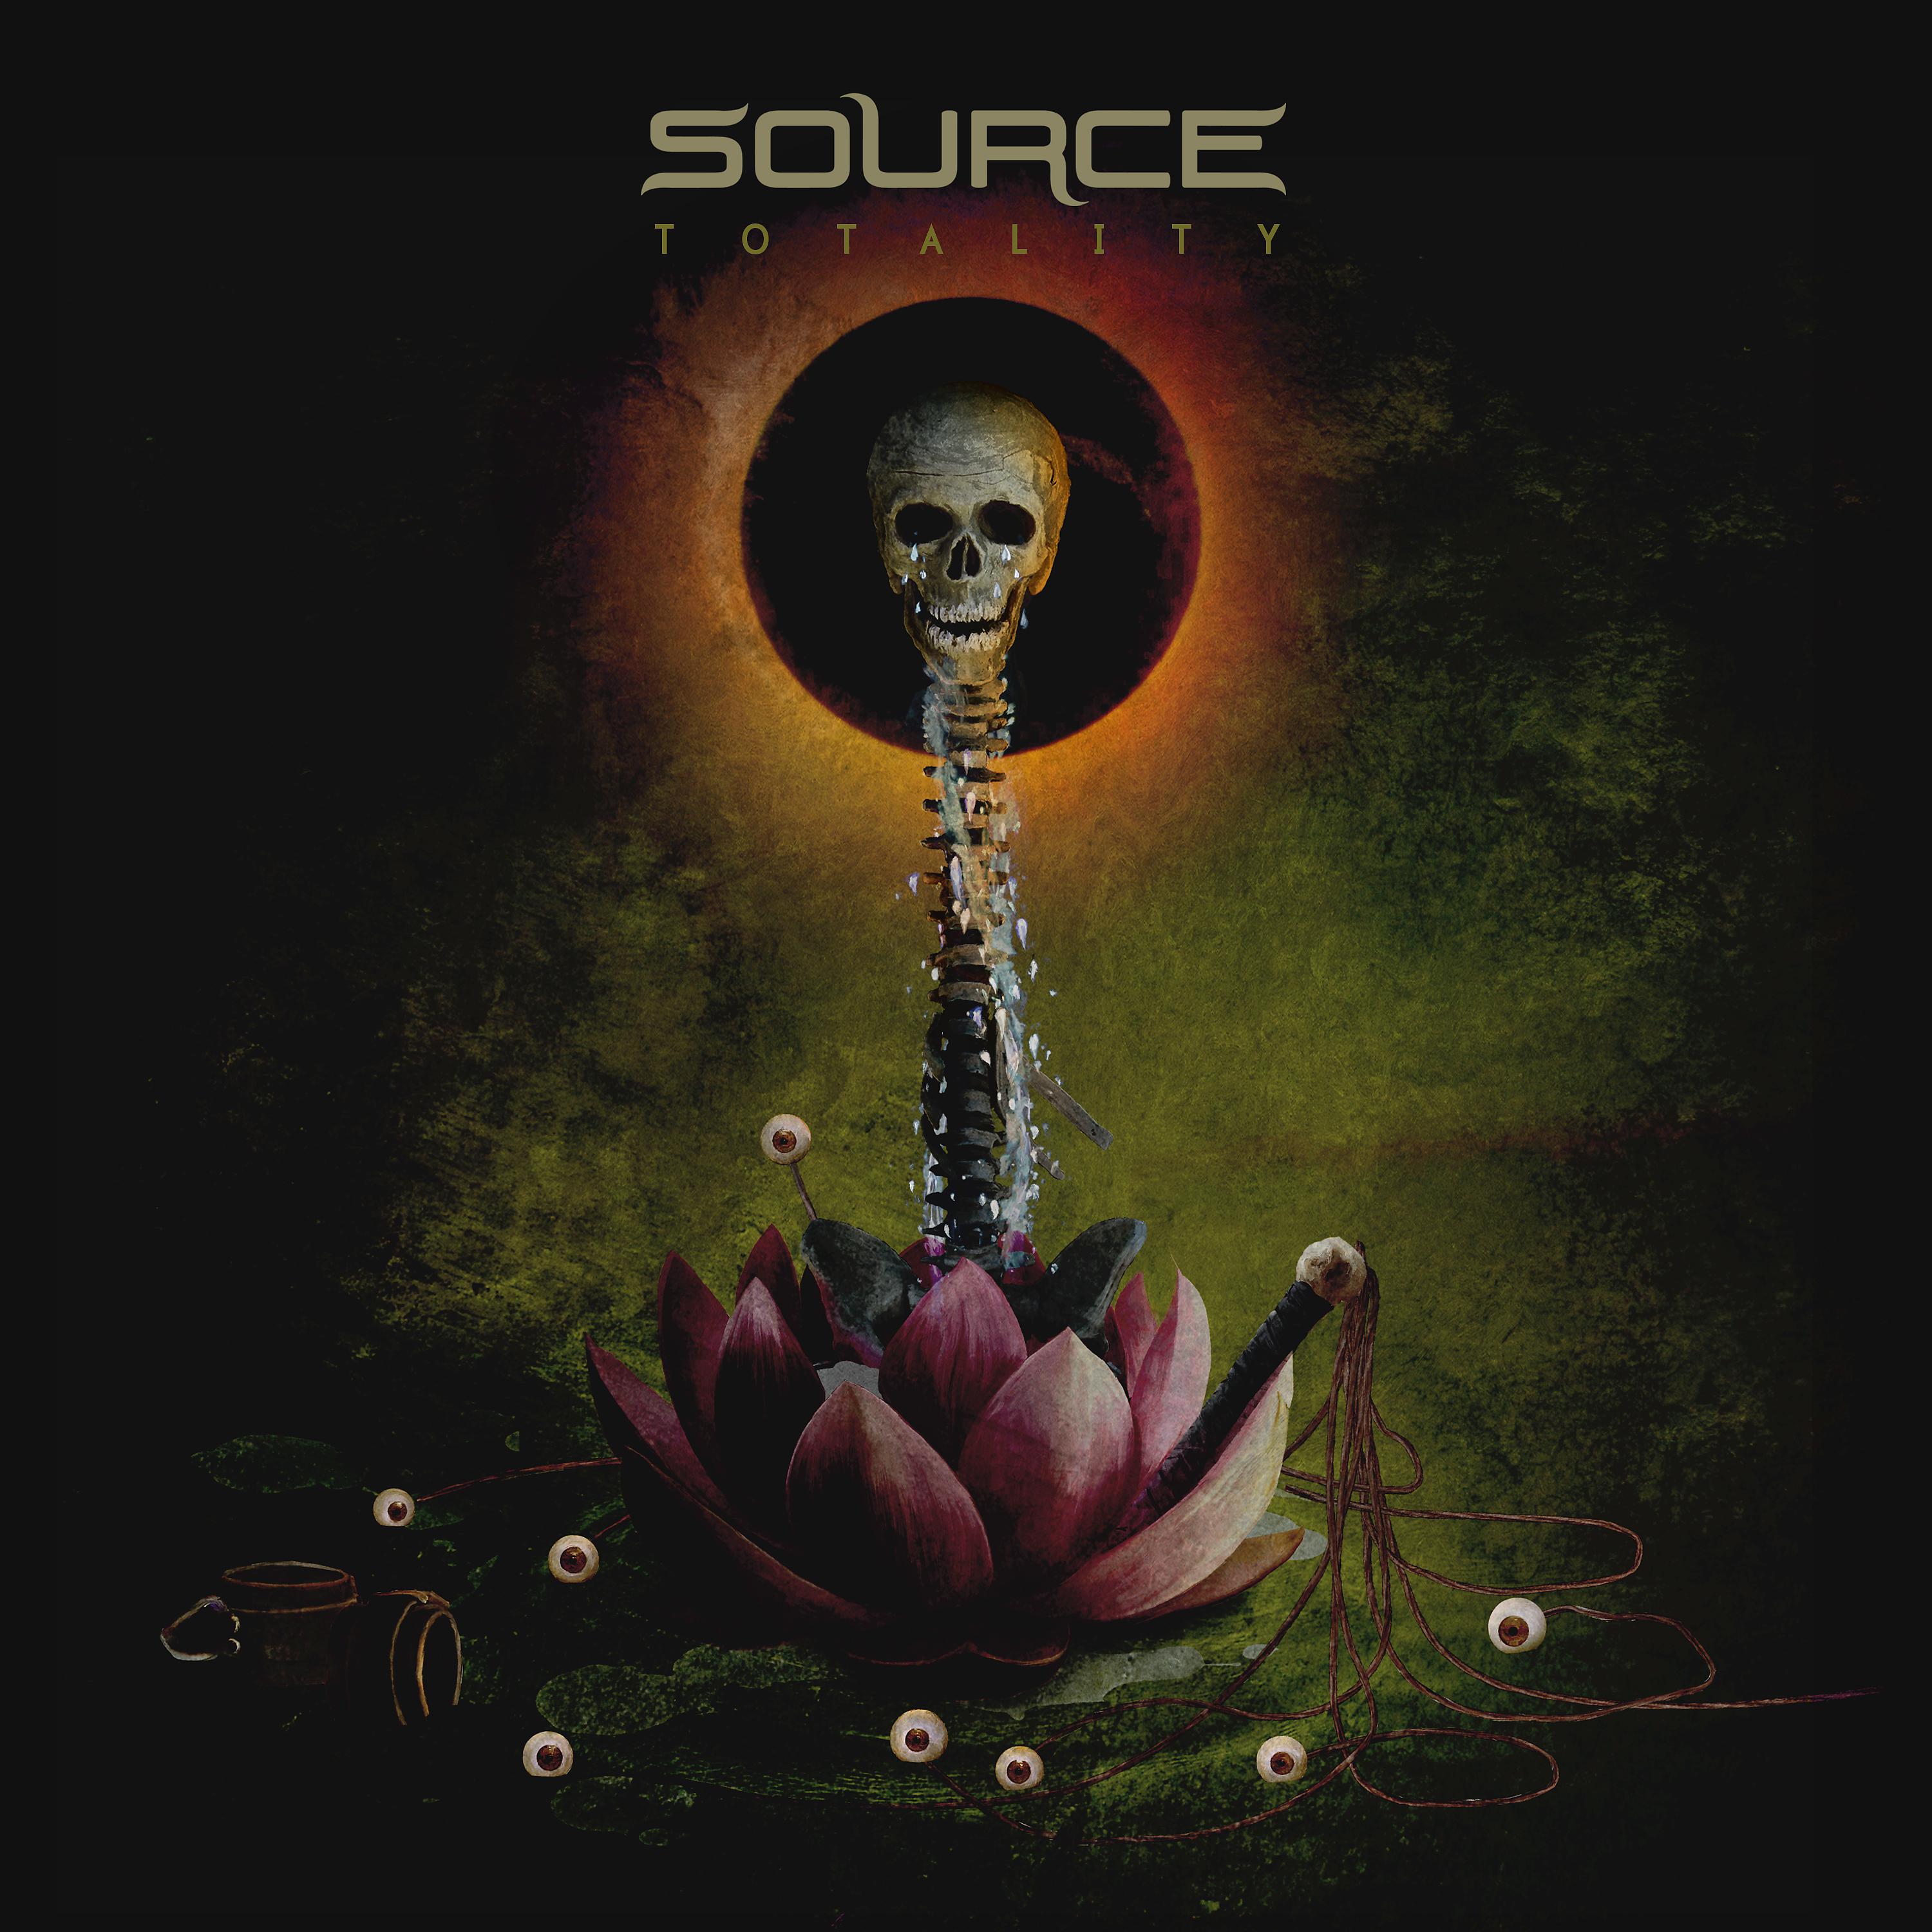 Cd source. The source Band. Opeth Orchid album Cover. Ad исходник для песен. The Superjesus.